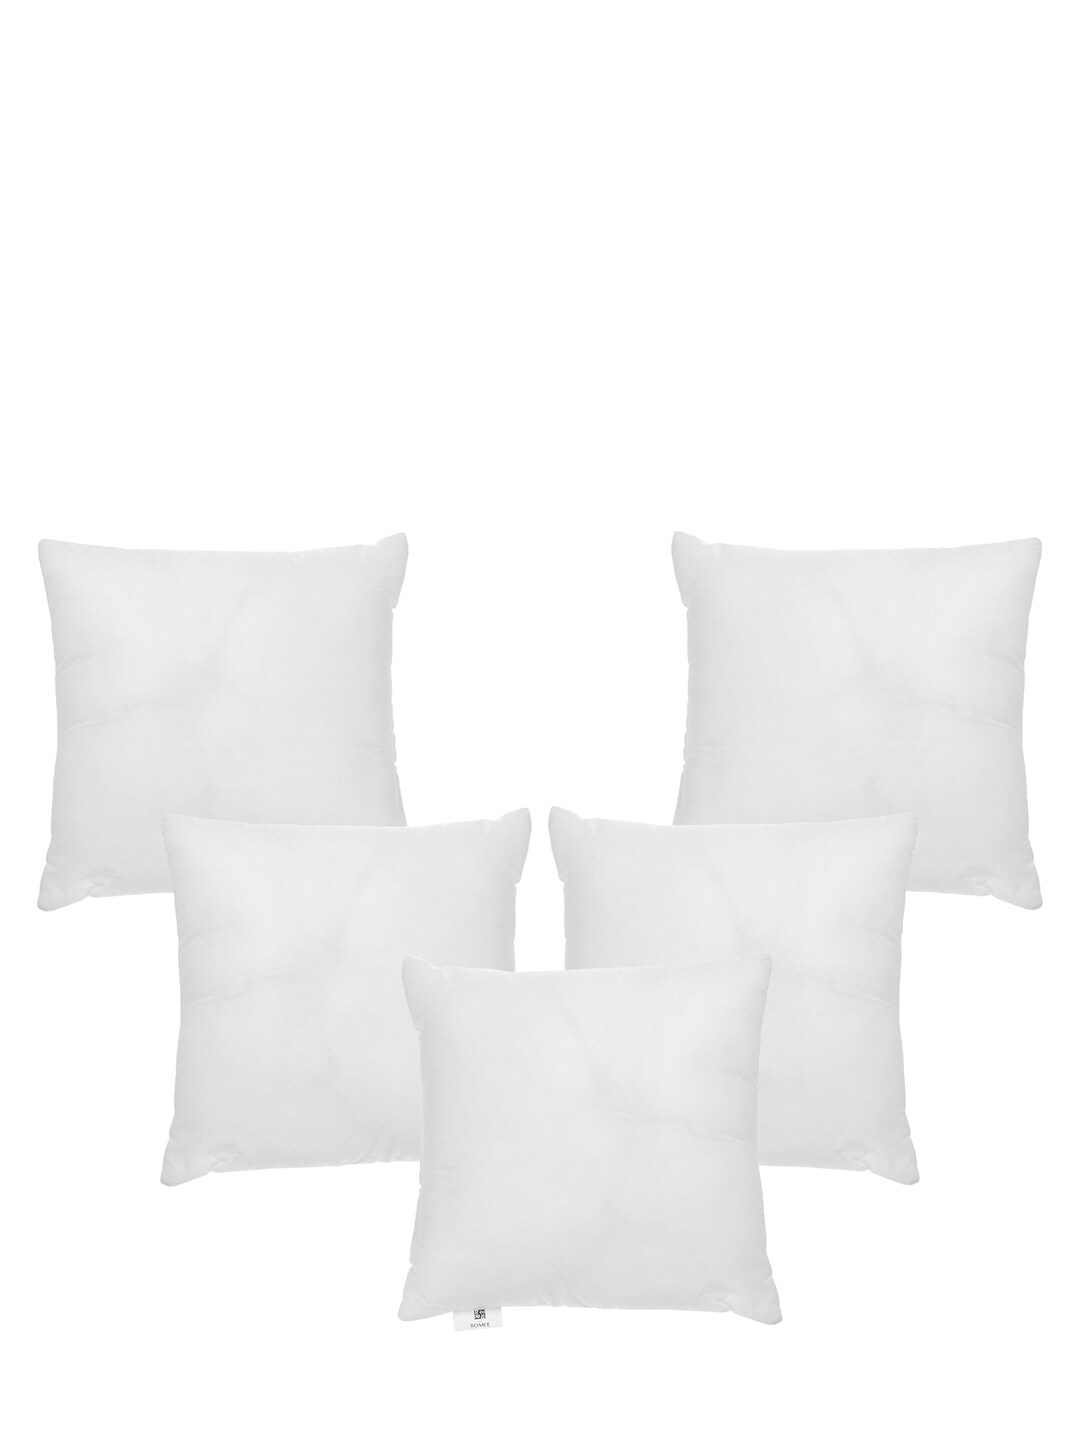 ROMEE Set of 5 White Microfiber Square Cushion Fillers Price in India